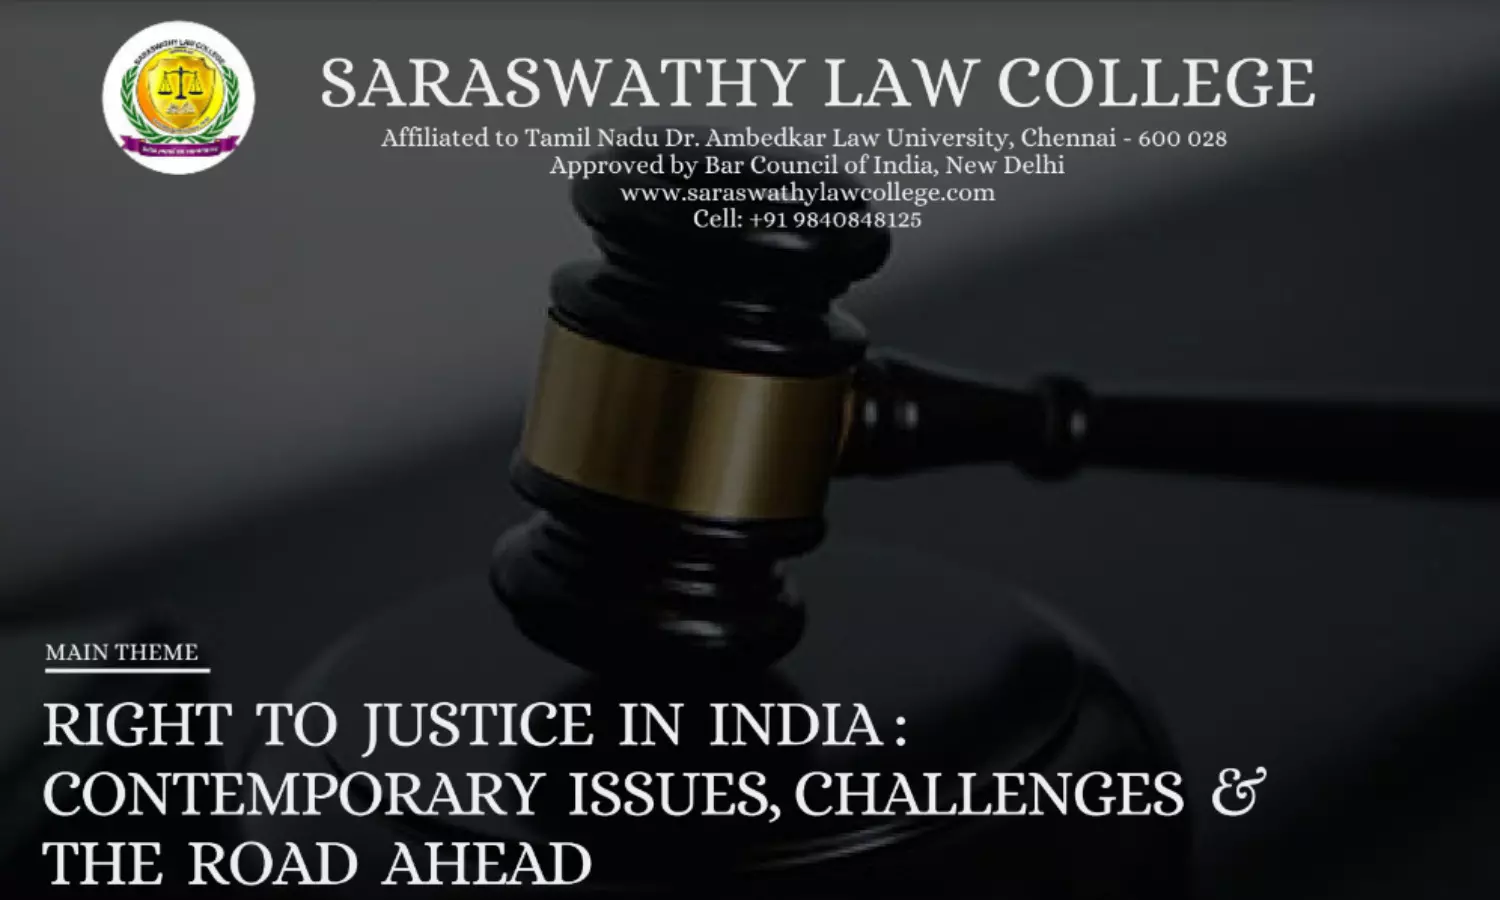 Call for Papers | One Day National Conference on Right to Justice in India | Saraswathy Law College | Submit by 15 March 2023